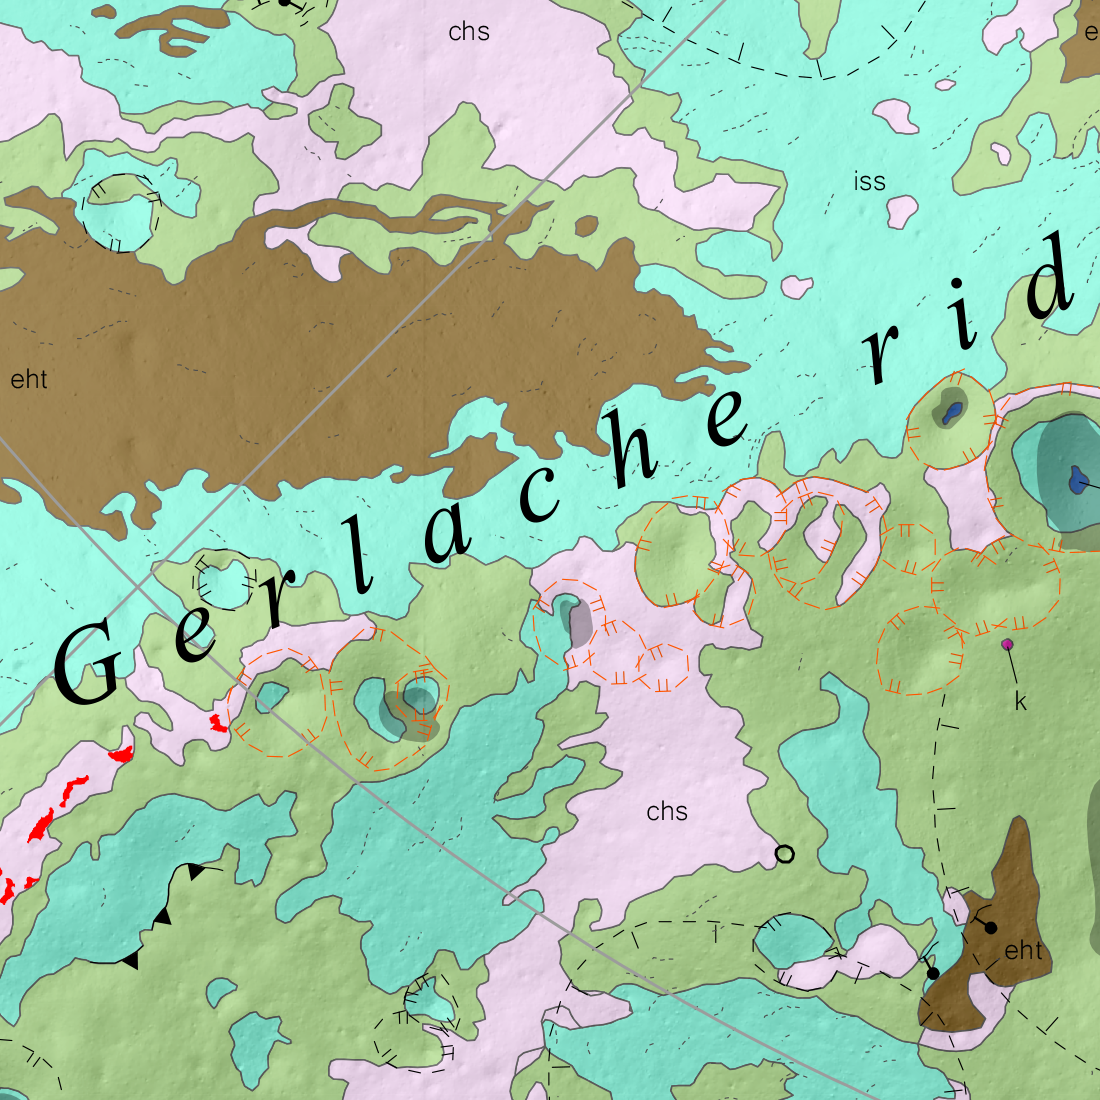 Small area of geomorphic map